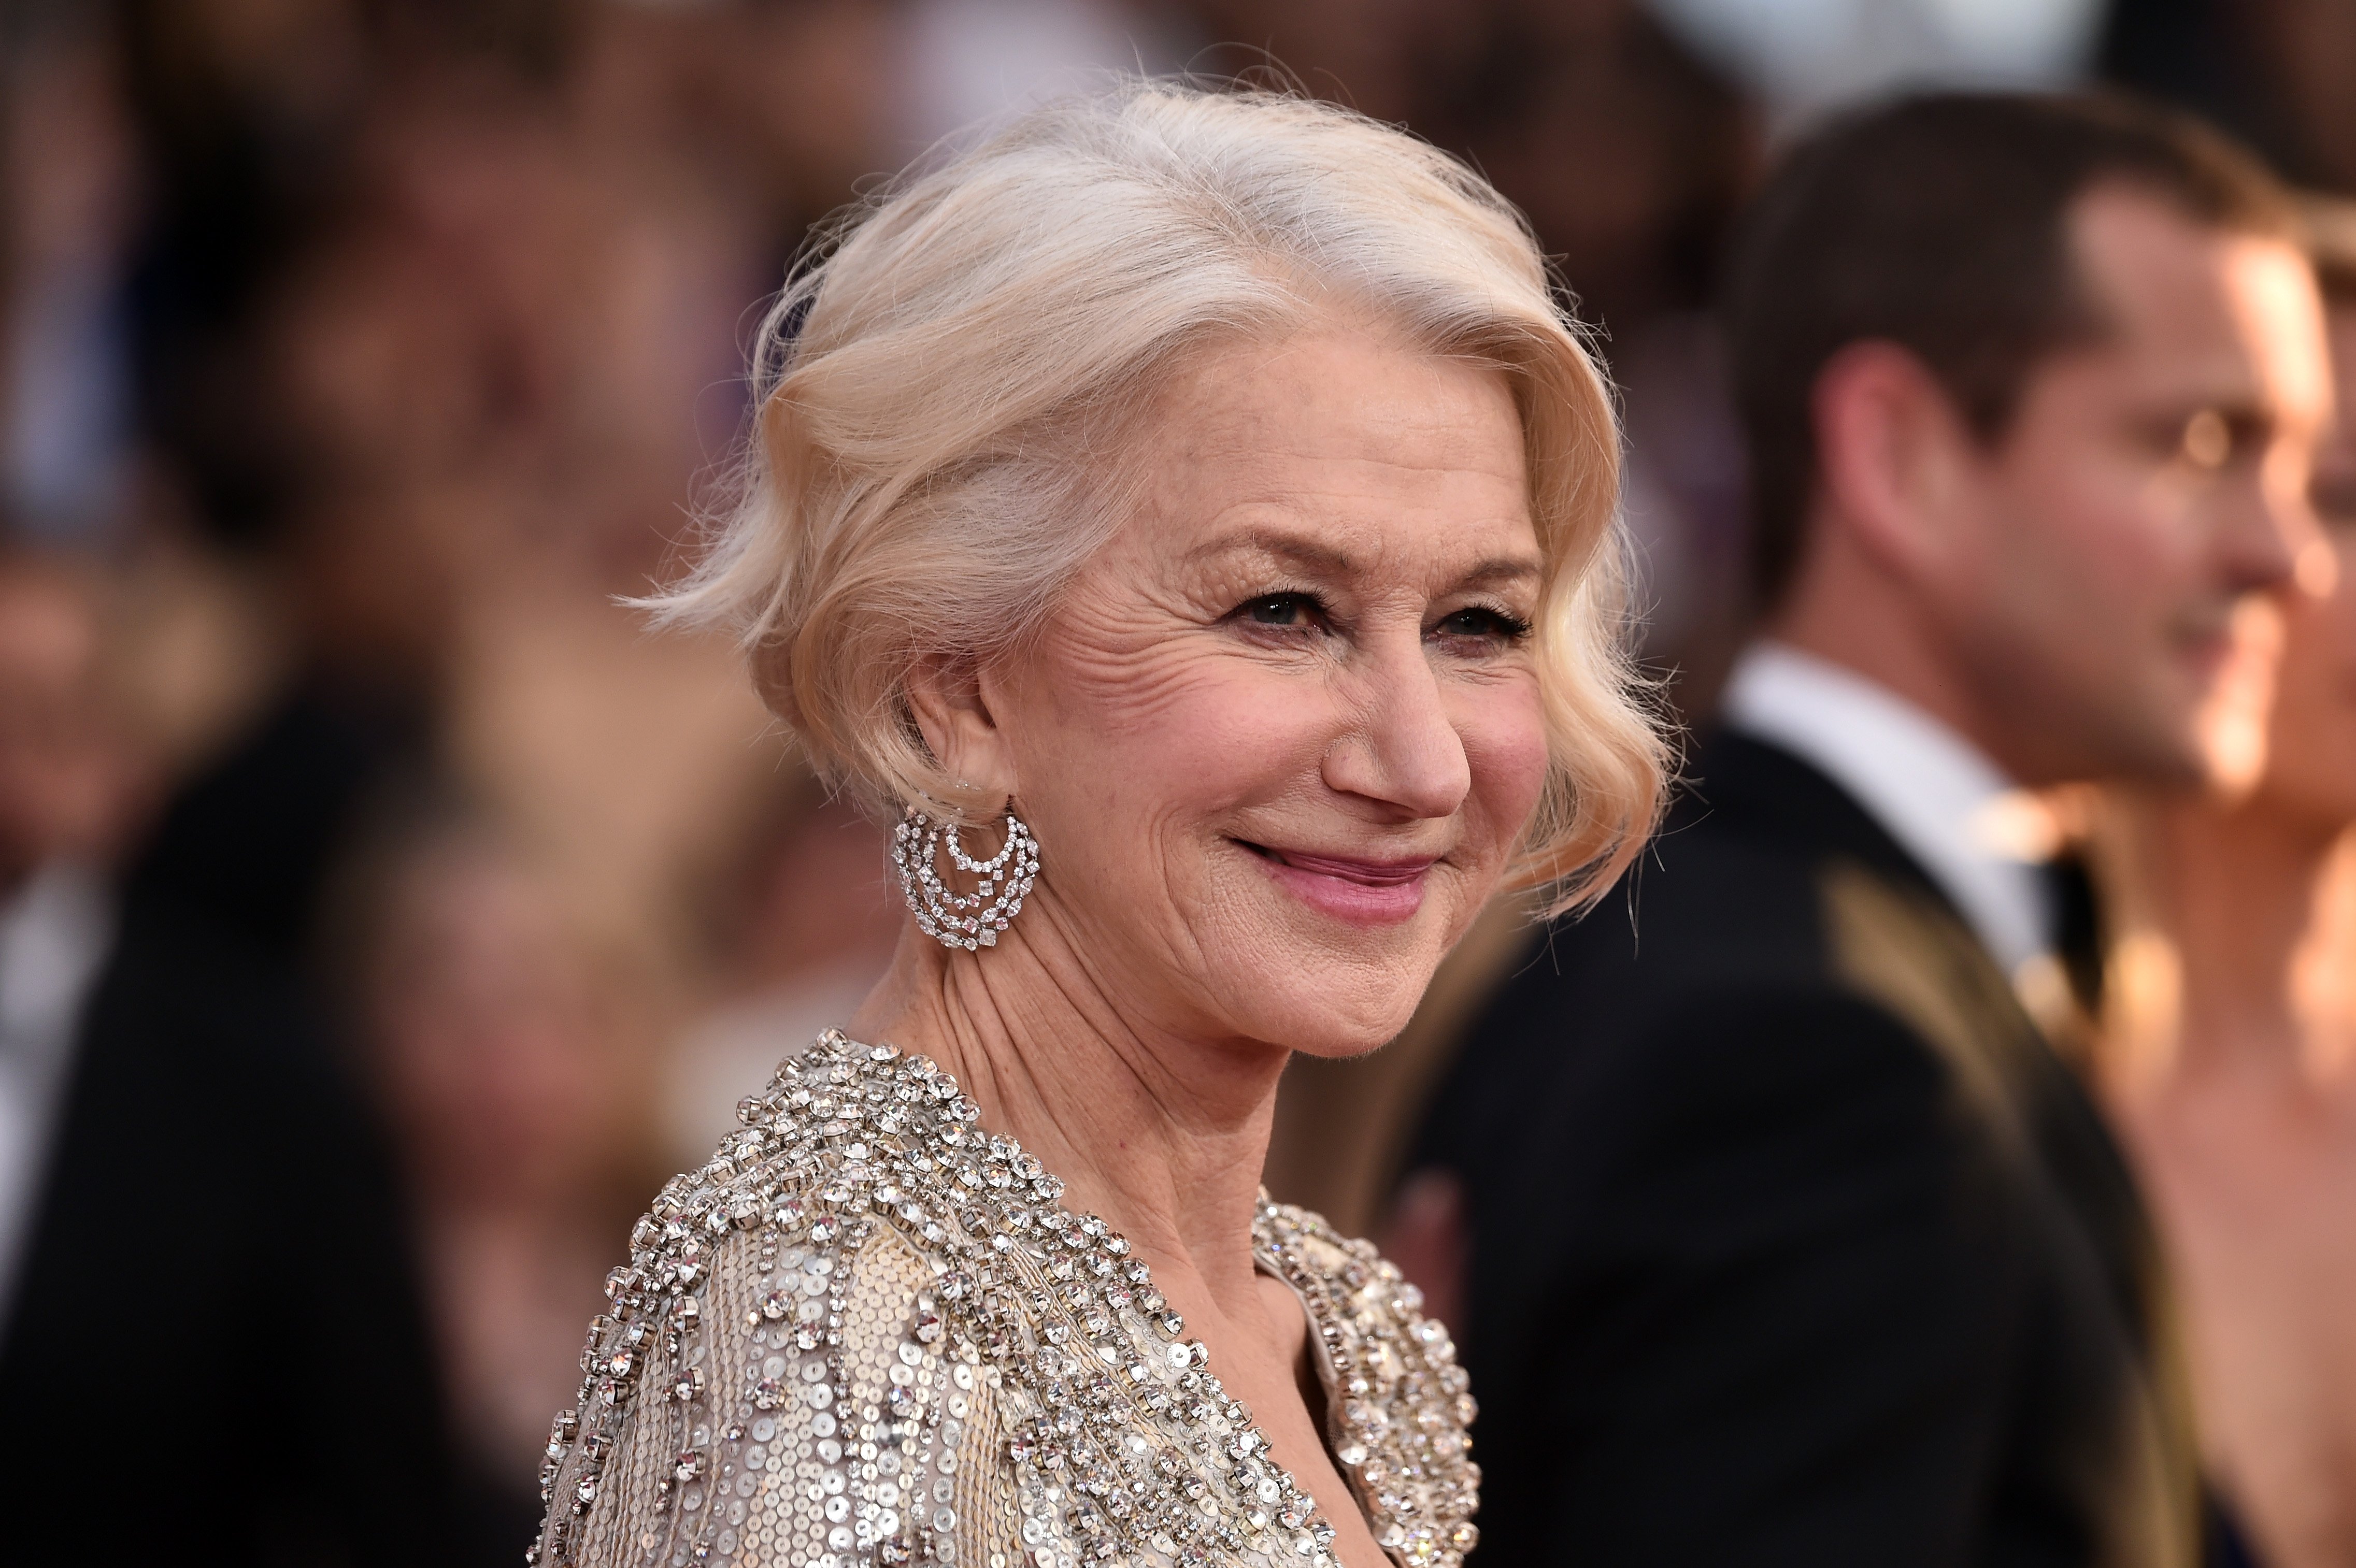 Helen Mirren attends the 22nd Annual Screen Actors Guild Awards at the Shrine Auditorium on January 30, 2016 in Los Angeles, California | Source: Getty Images